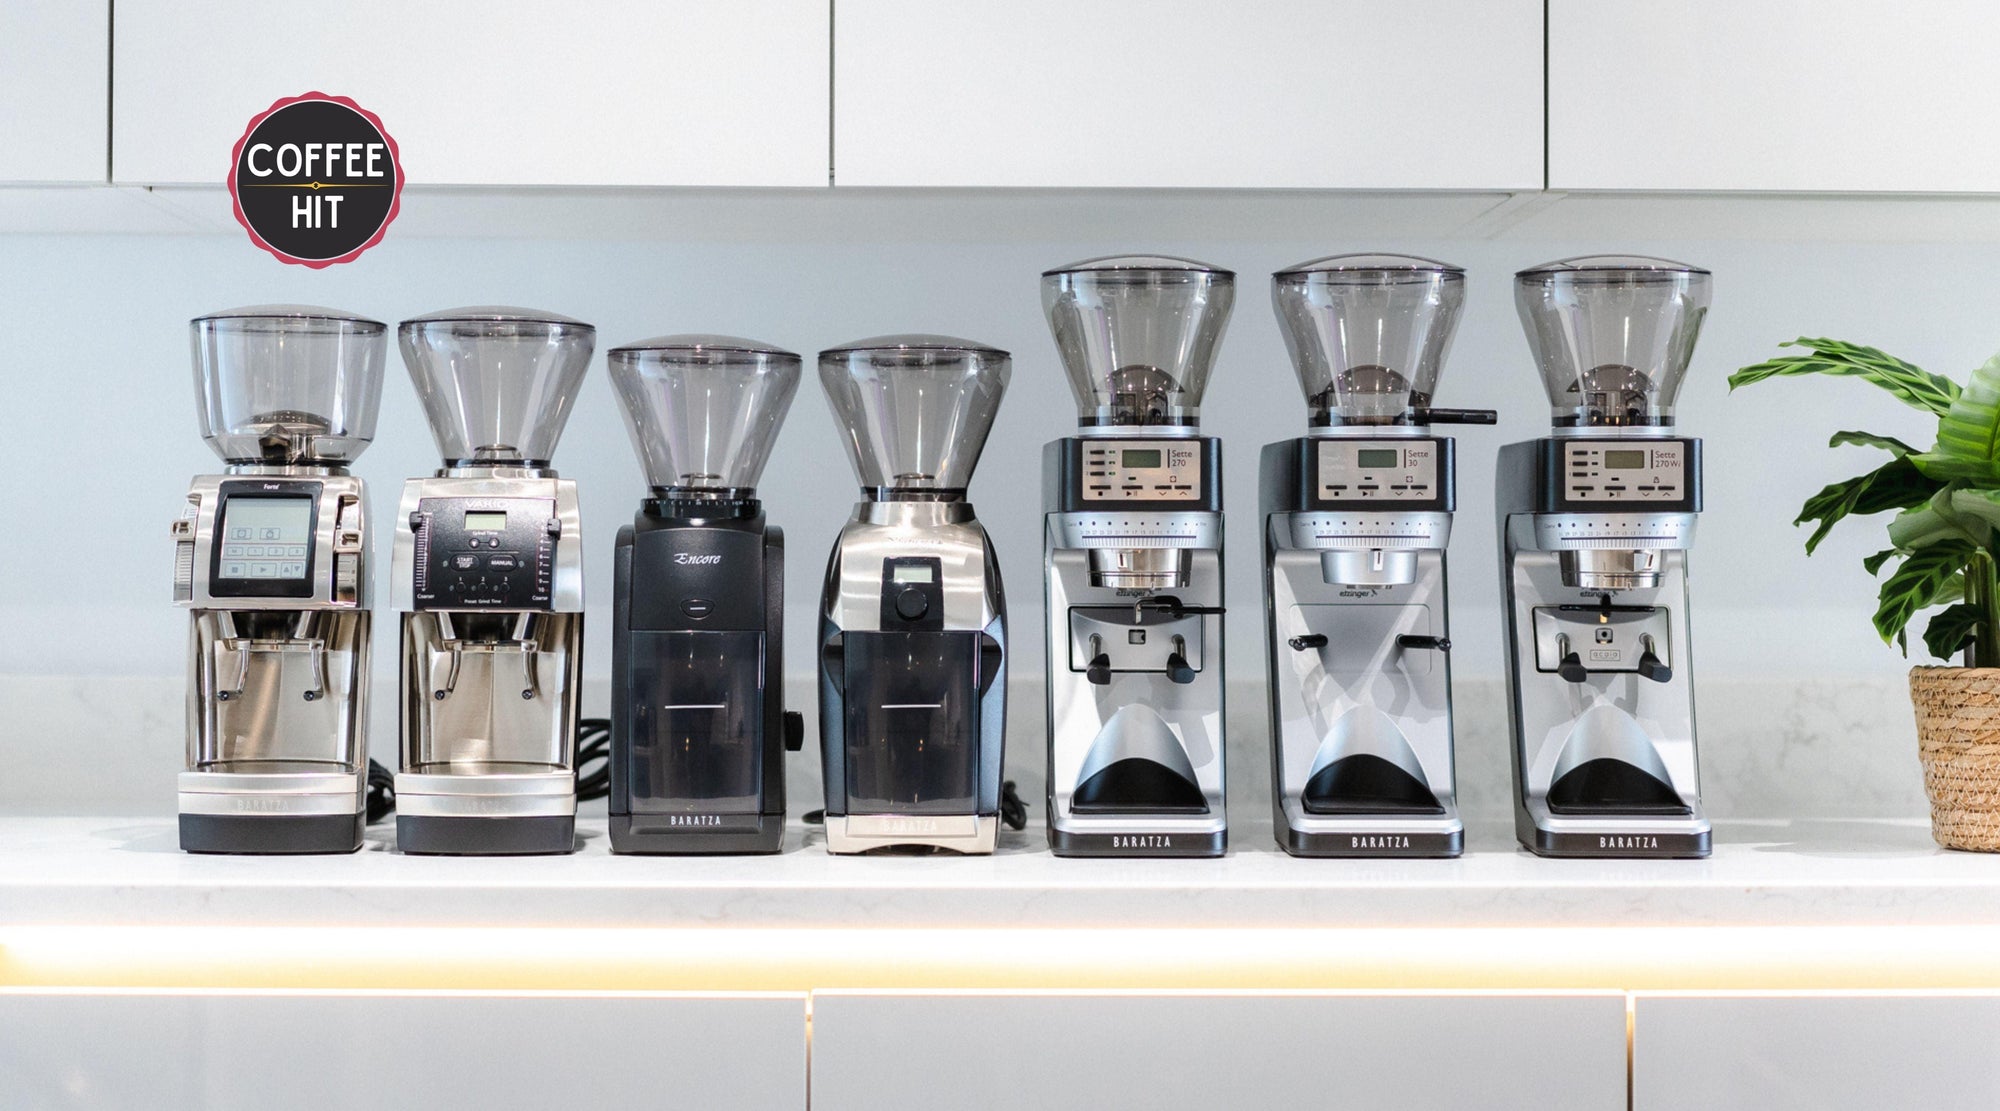 Broken Baratza Grinder? We’ll fix it for you from as little as £59! - Coffee Hit